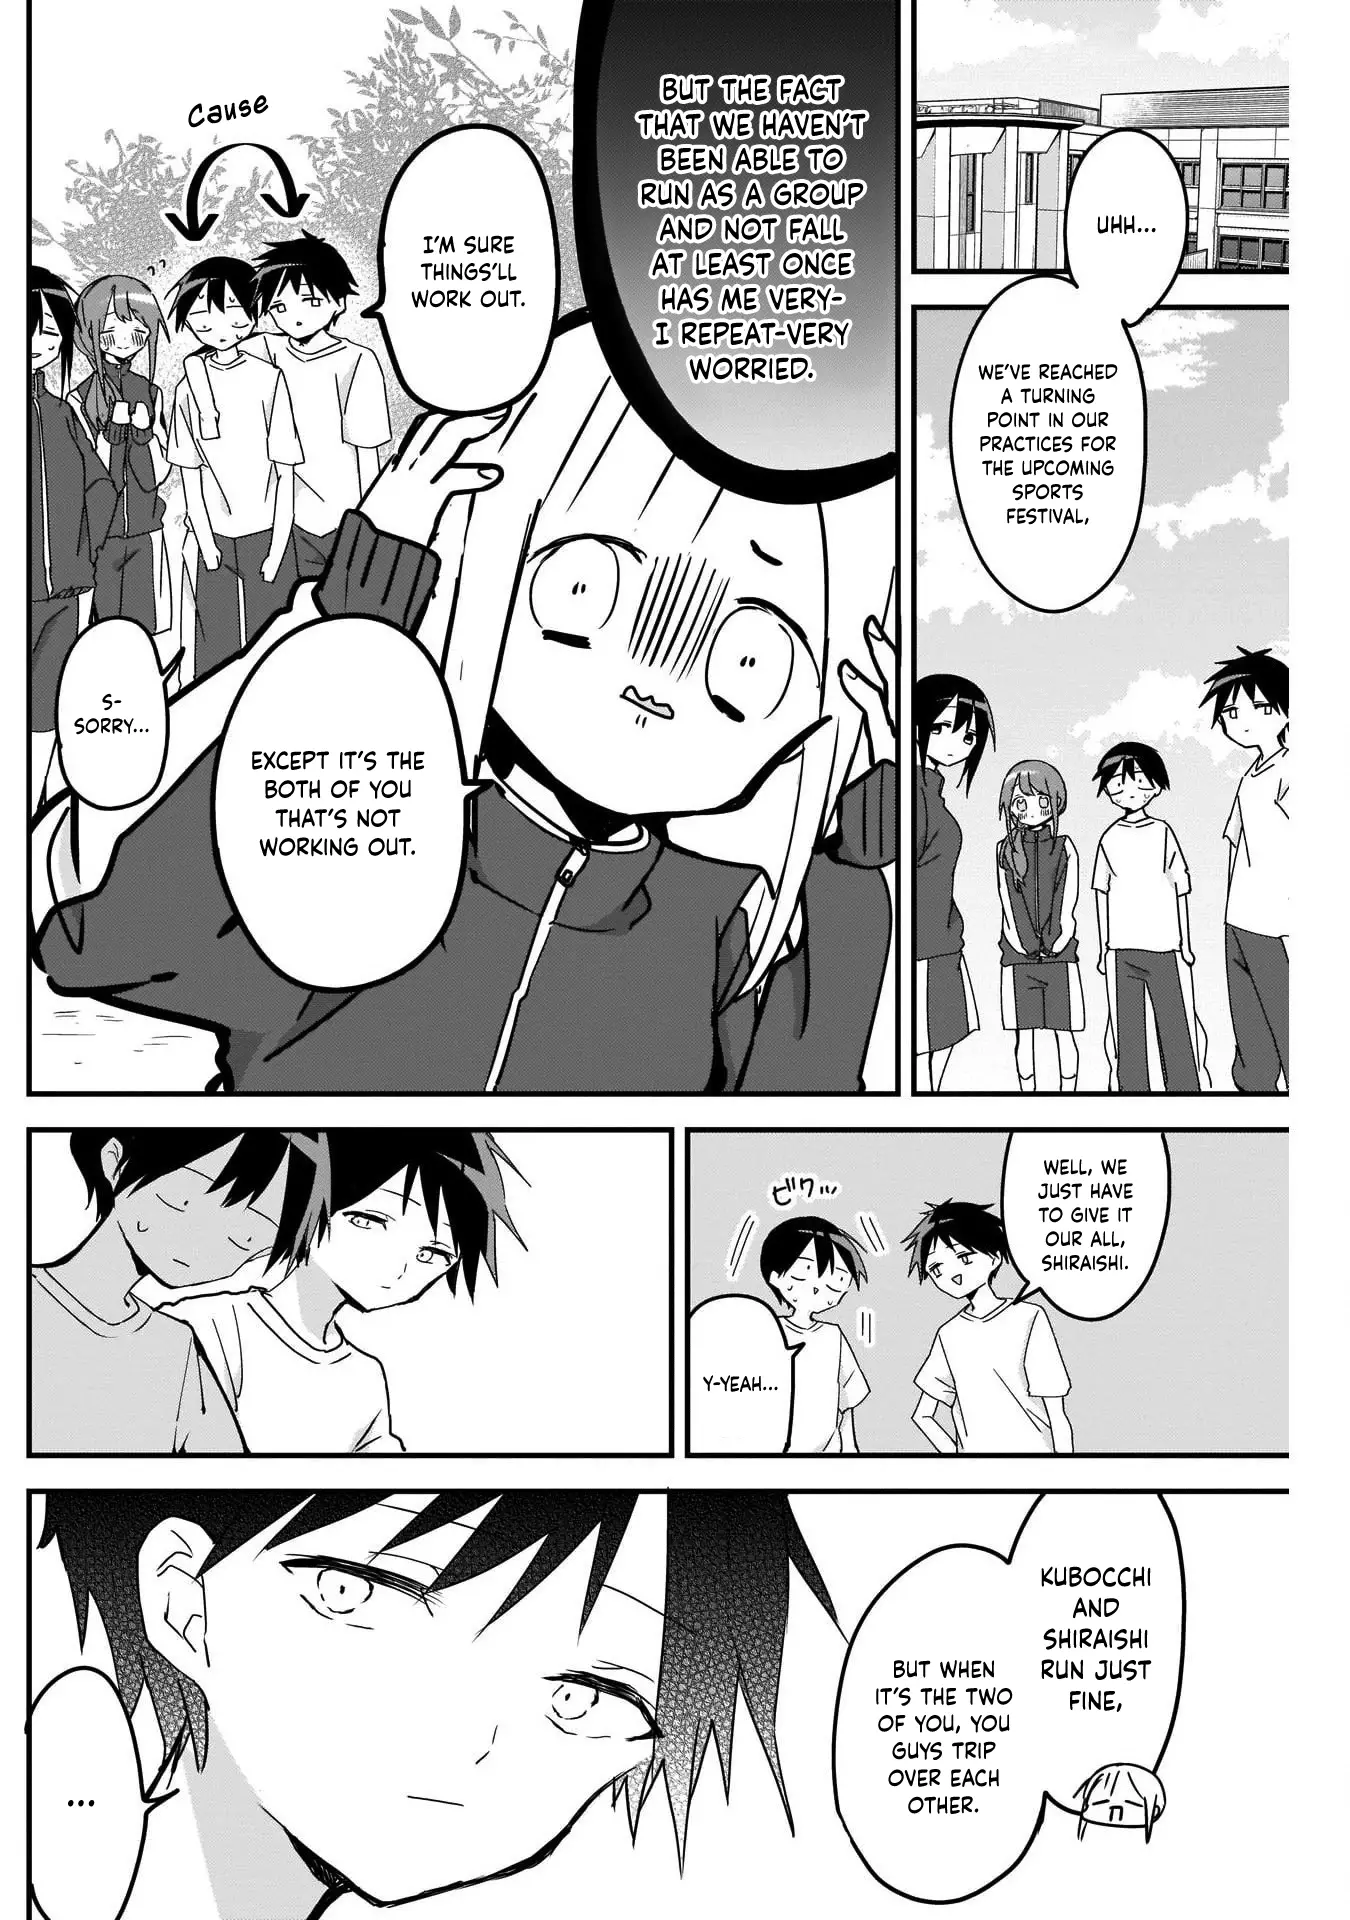 Kubo-San Doesn't Leave Me Be (A Mob) - 56 page 2